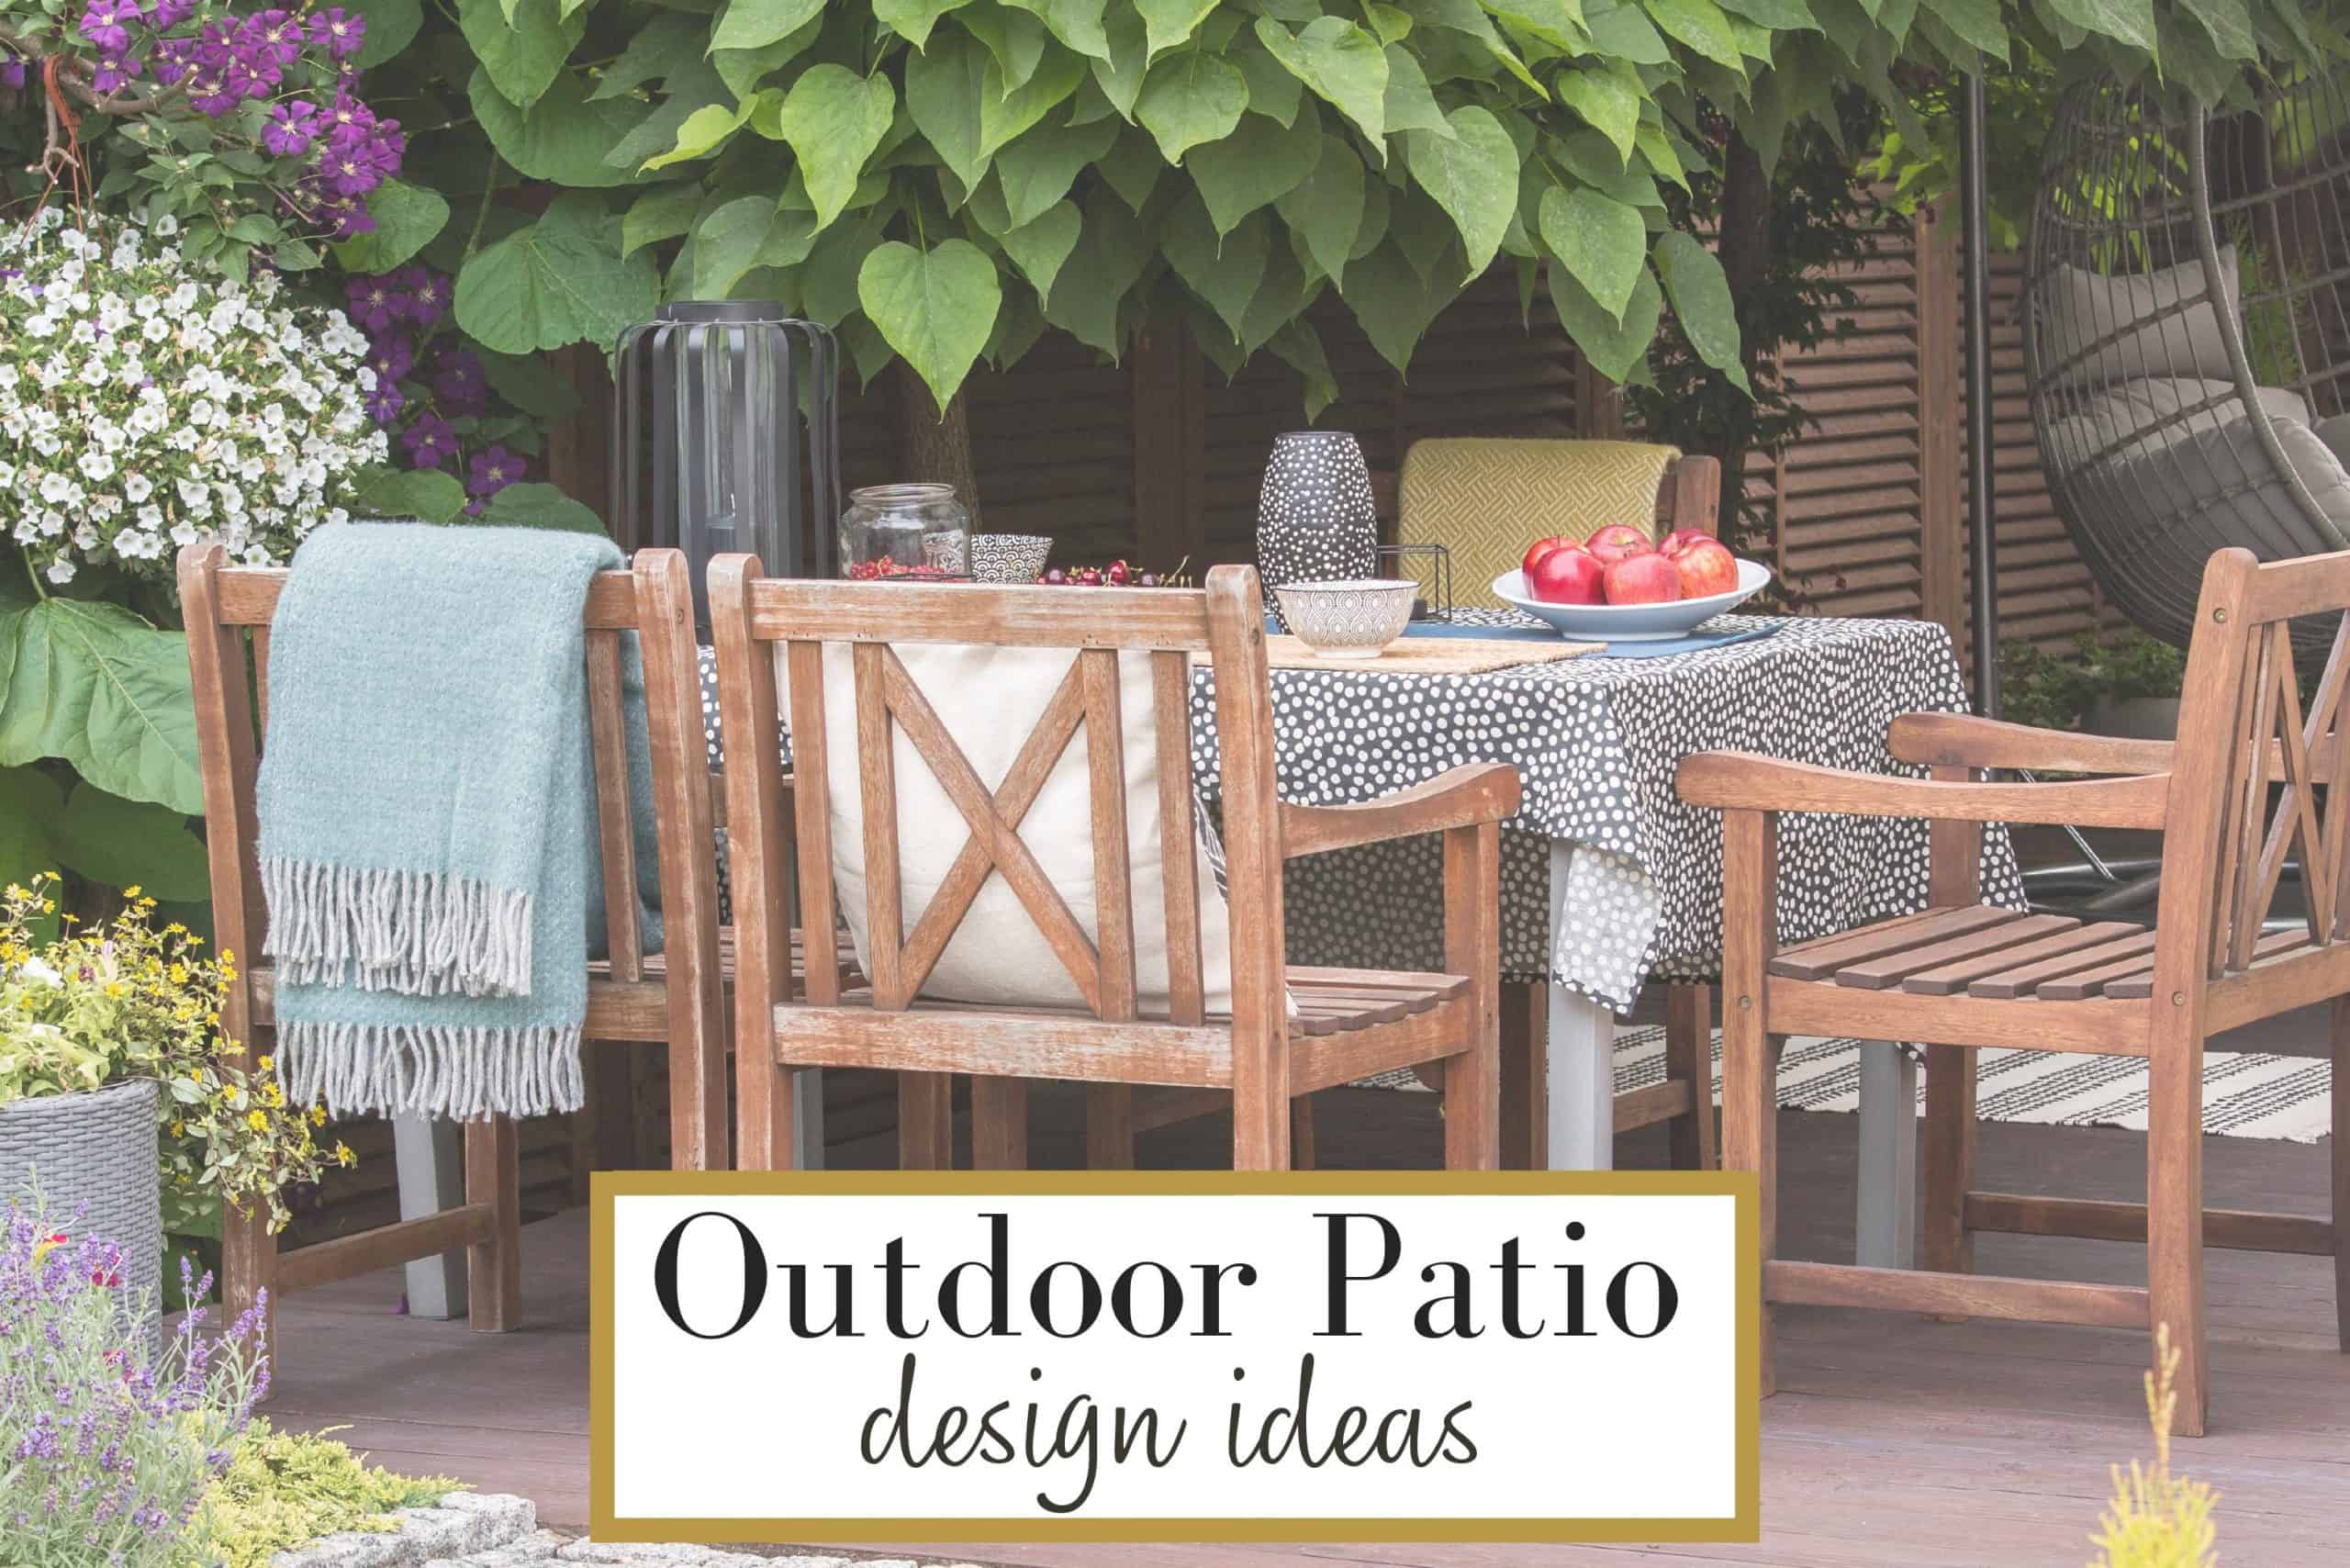 Outdoor patio with dining set and plants